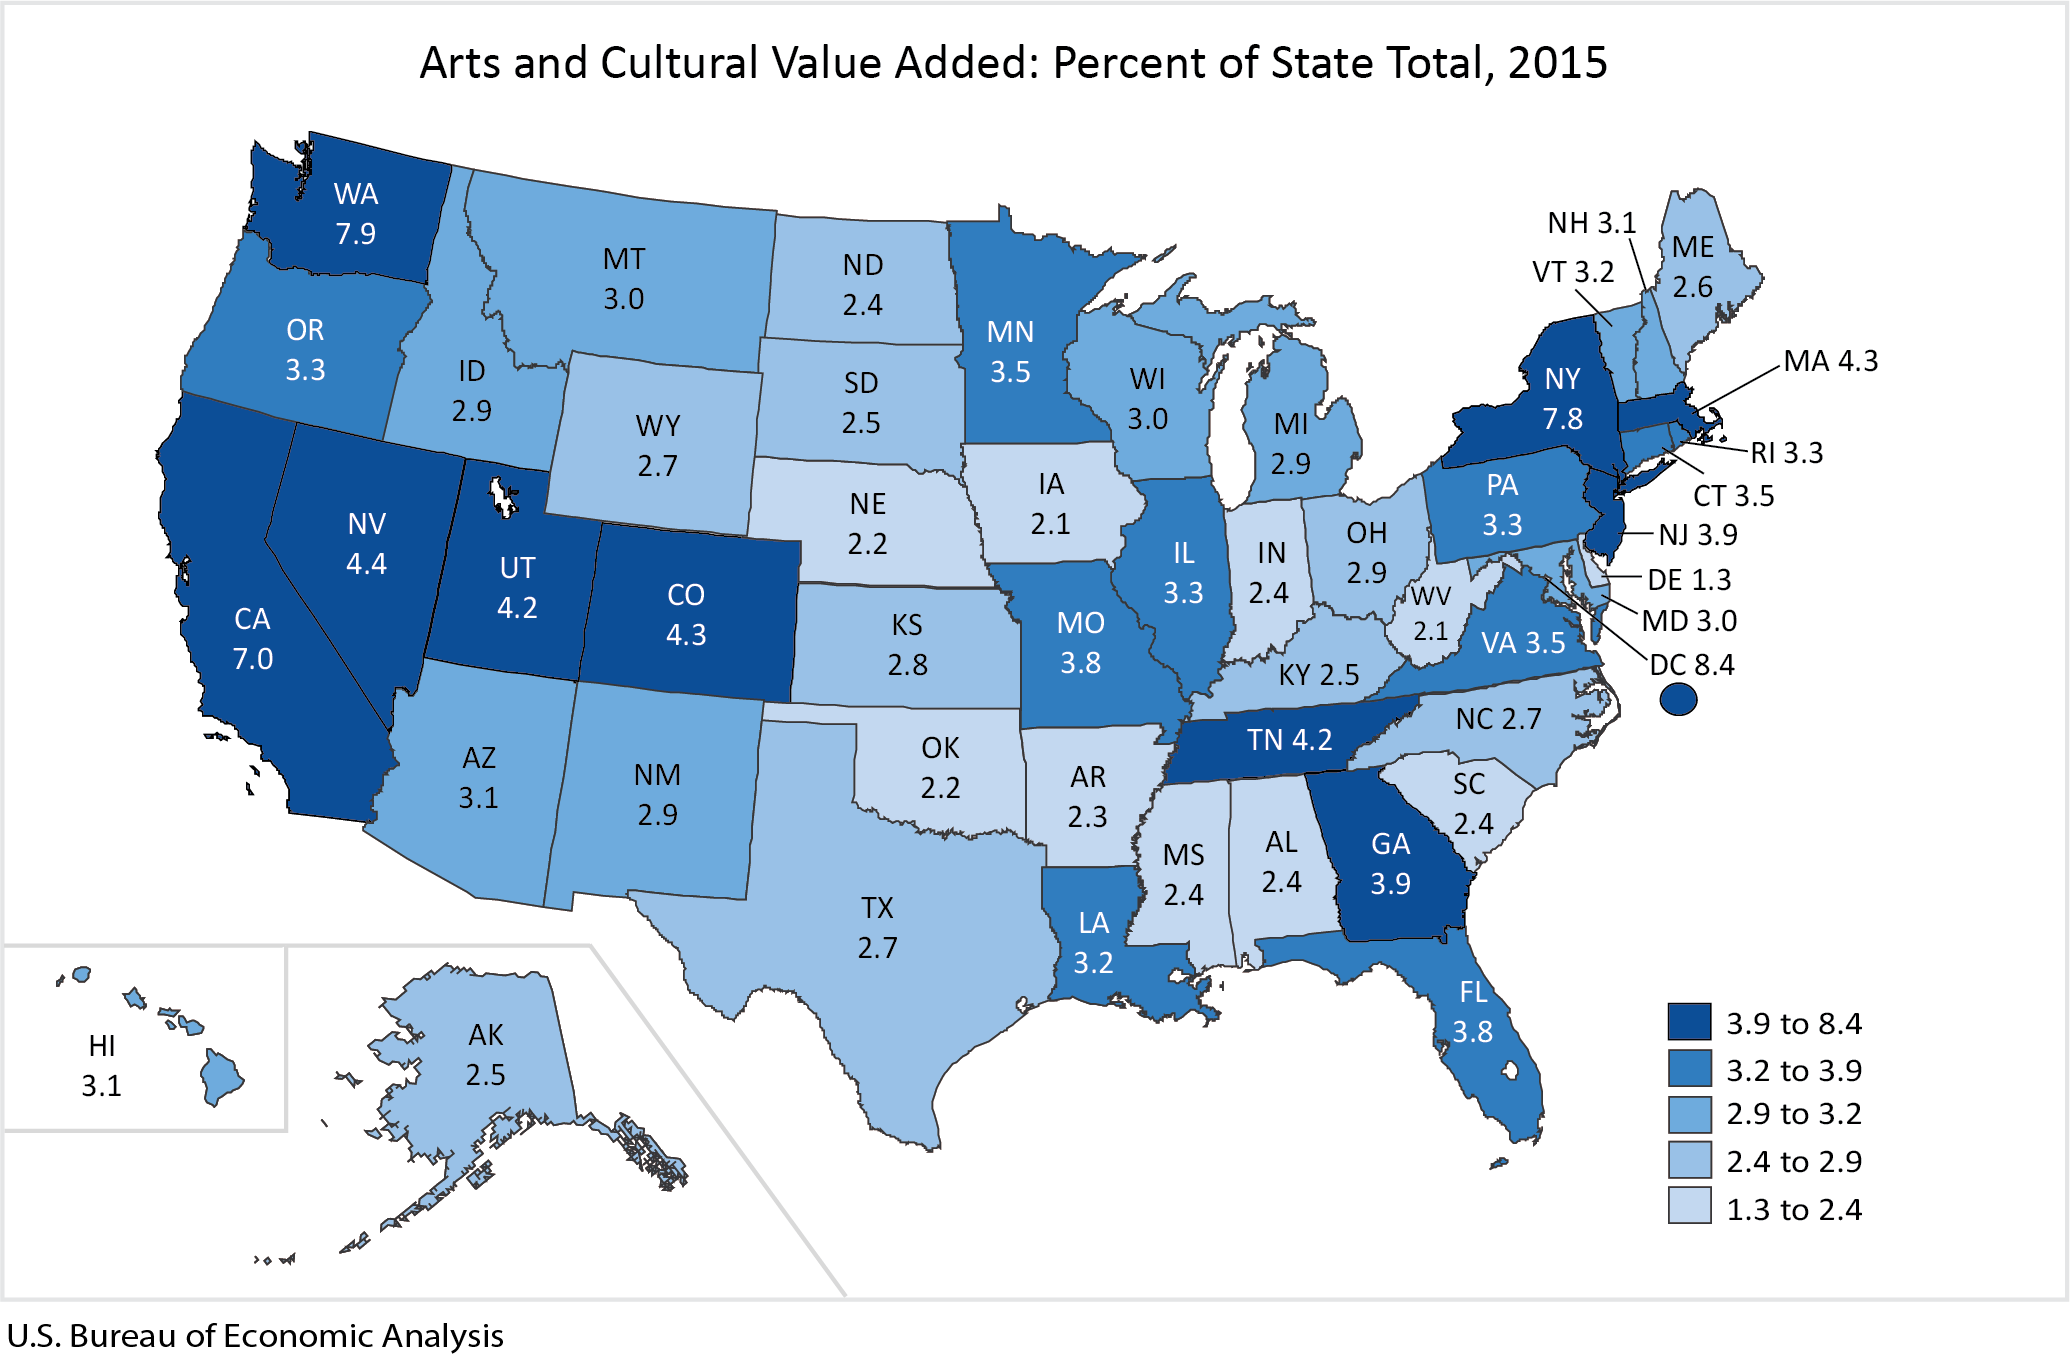 Arts and Cultural Value Added Map: Percent of State Total 2015